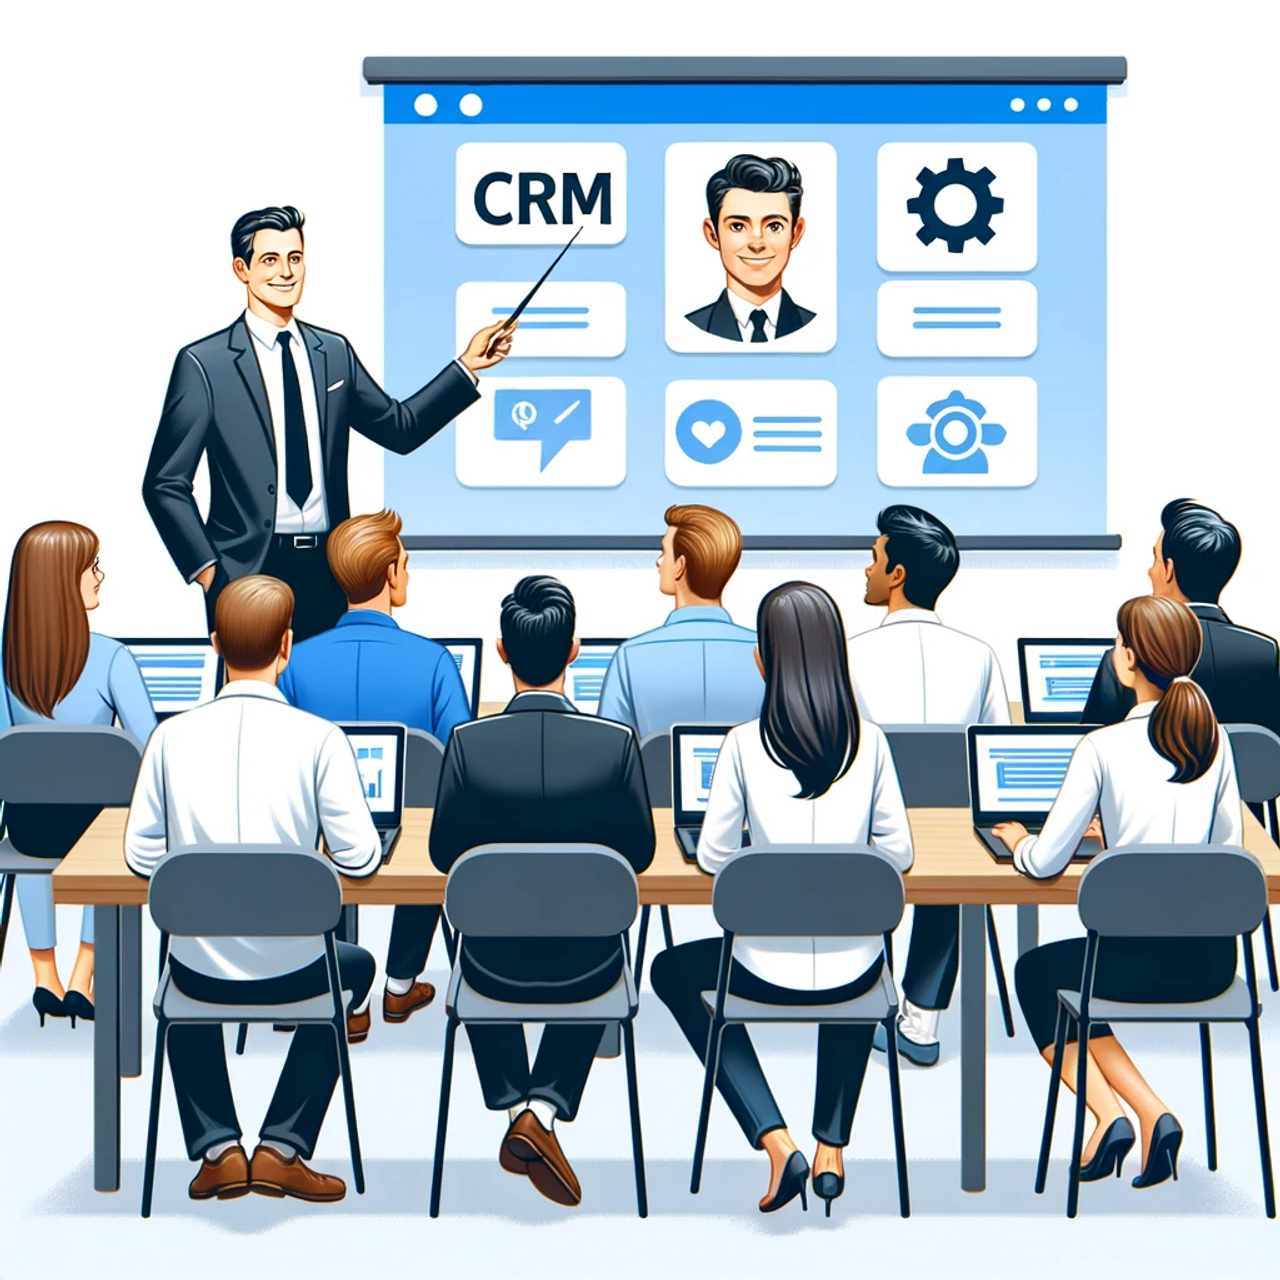 DALL·E 2023-10-30 08.19.32 - Illustration of a training setting with a male instructor pointing to a projection screen displaying CRM software tools. Attendees, including men and .png